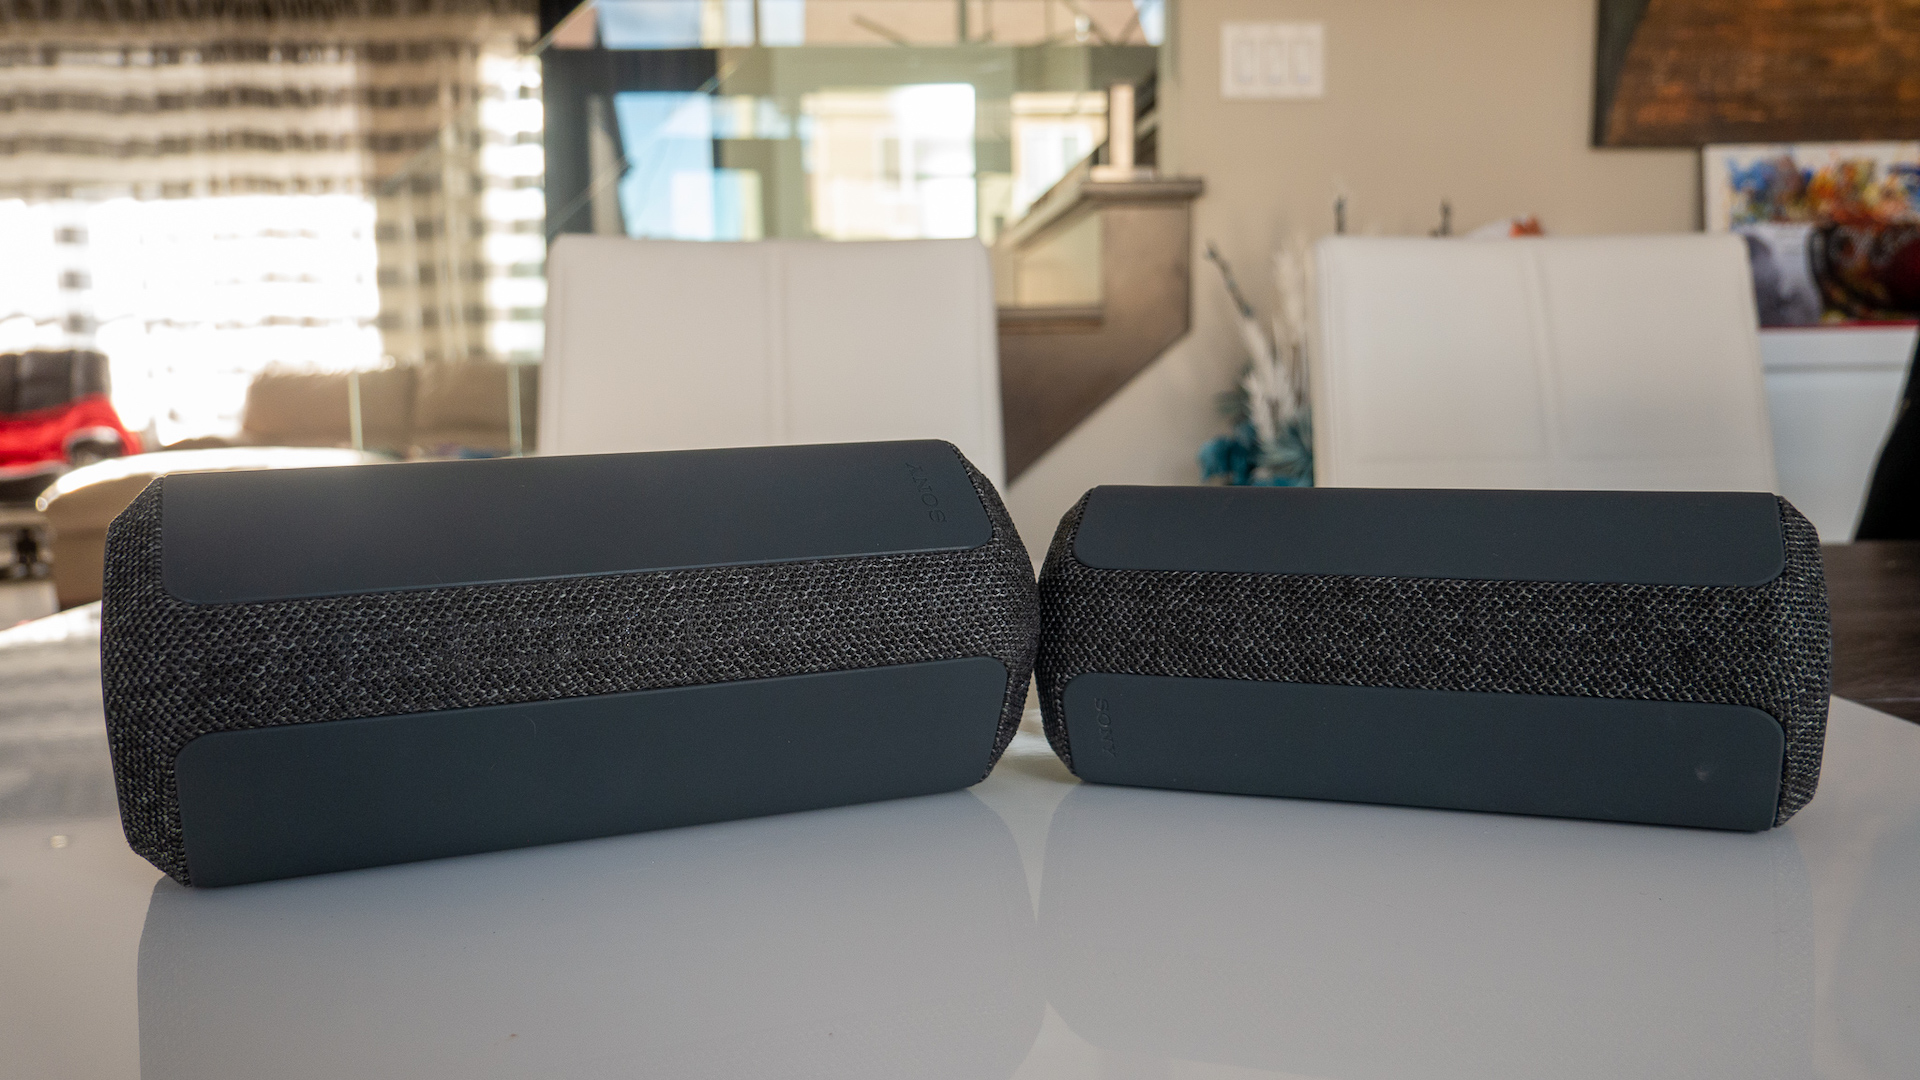 Image of XE200 and XE300 Bluetooth Speaker lying down on table